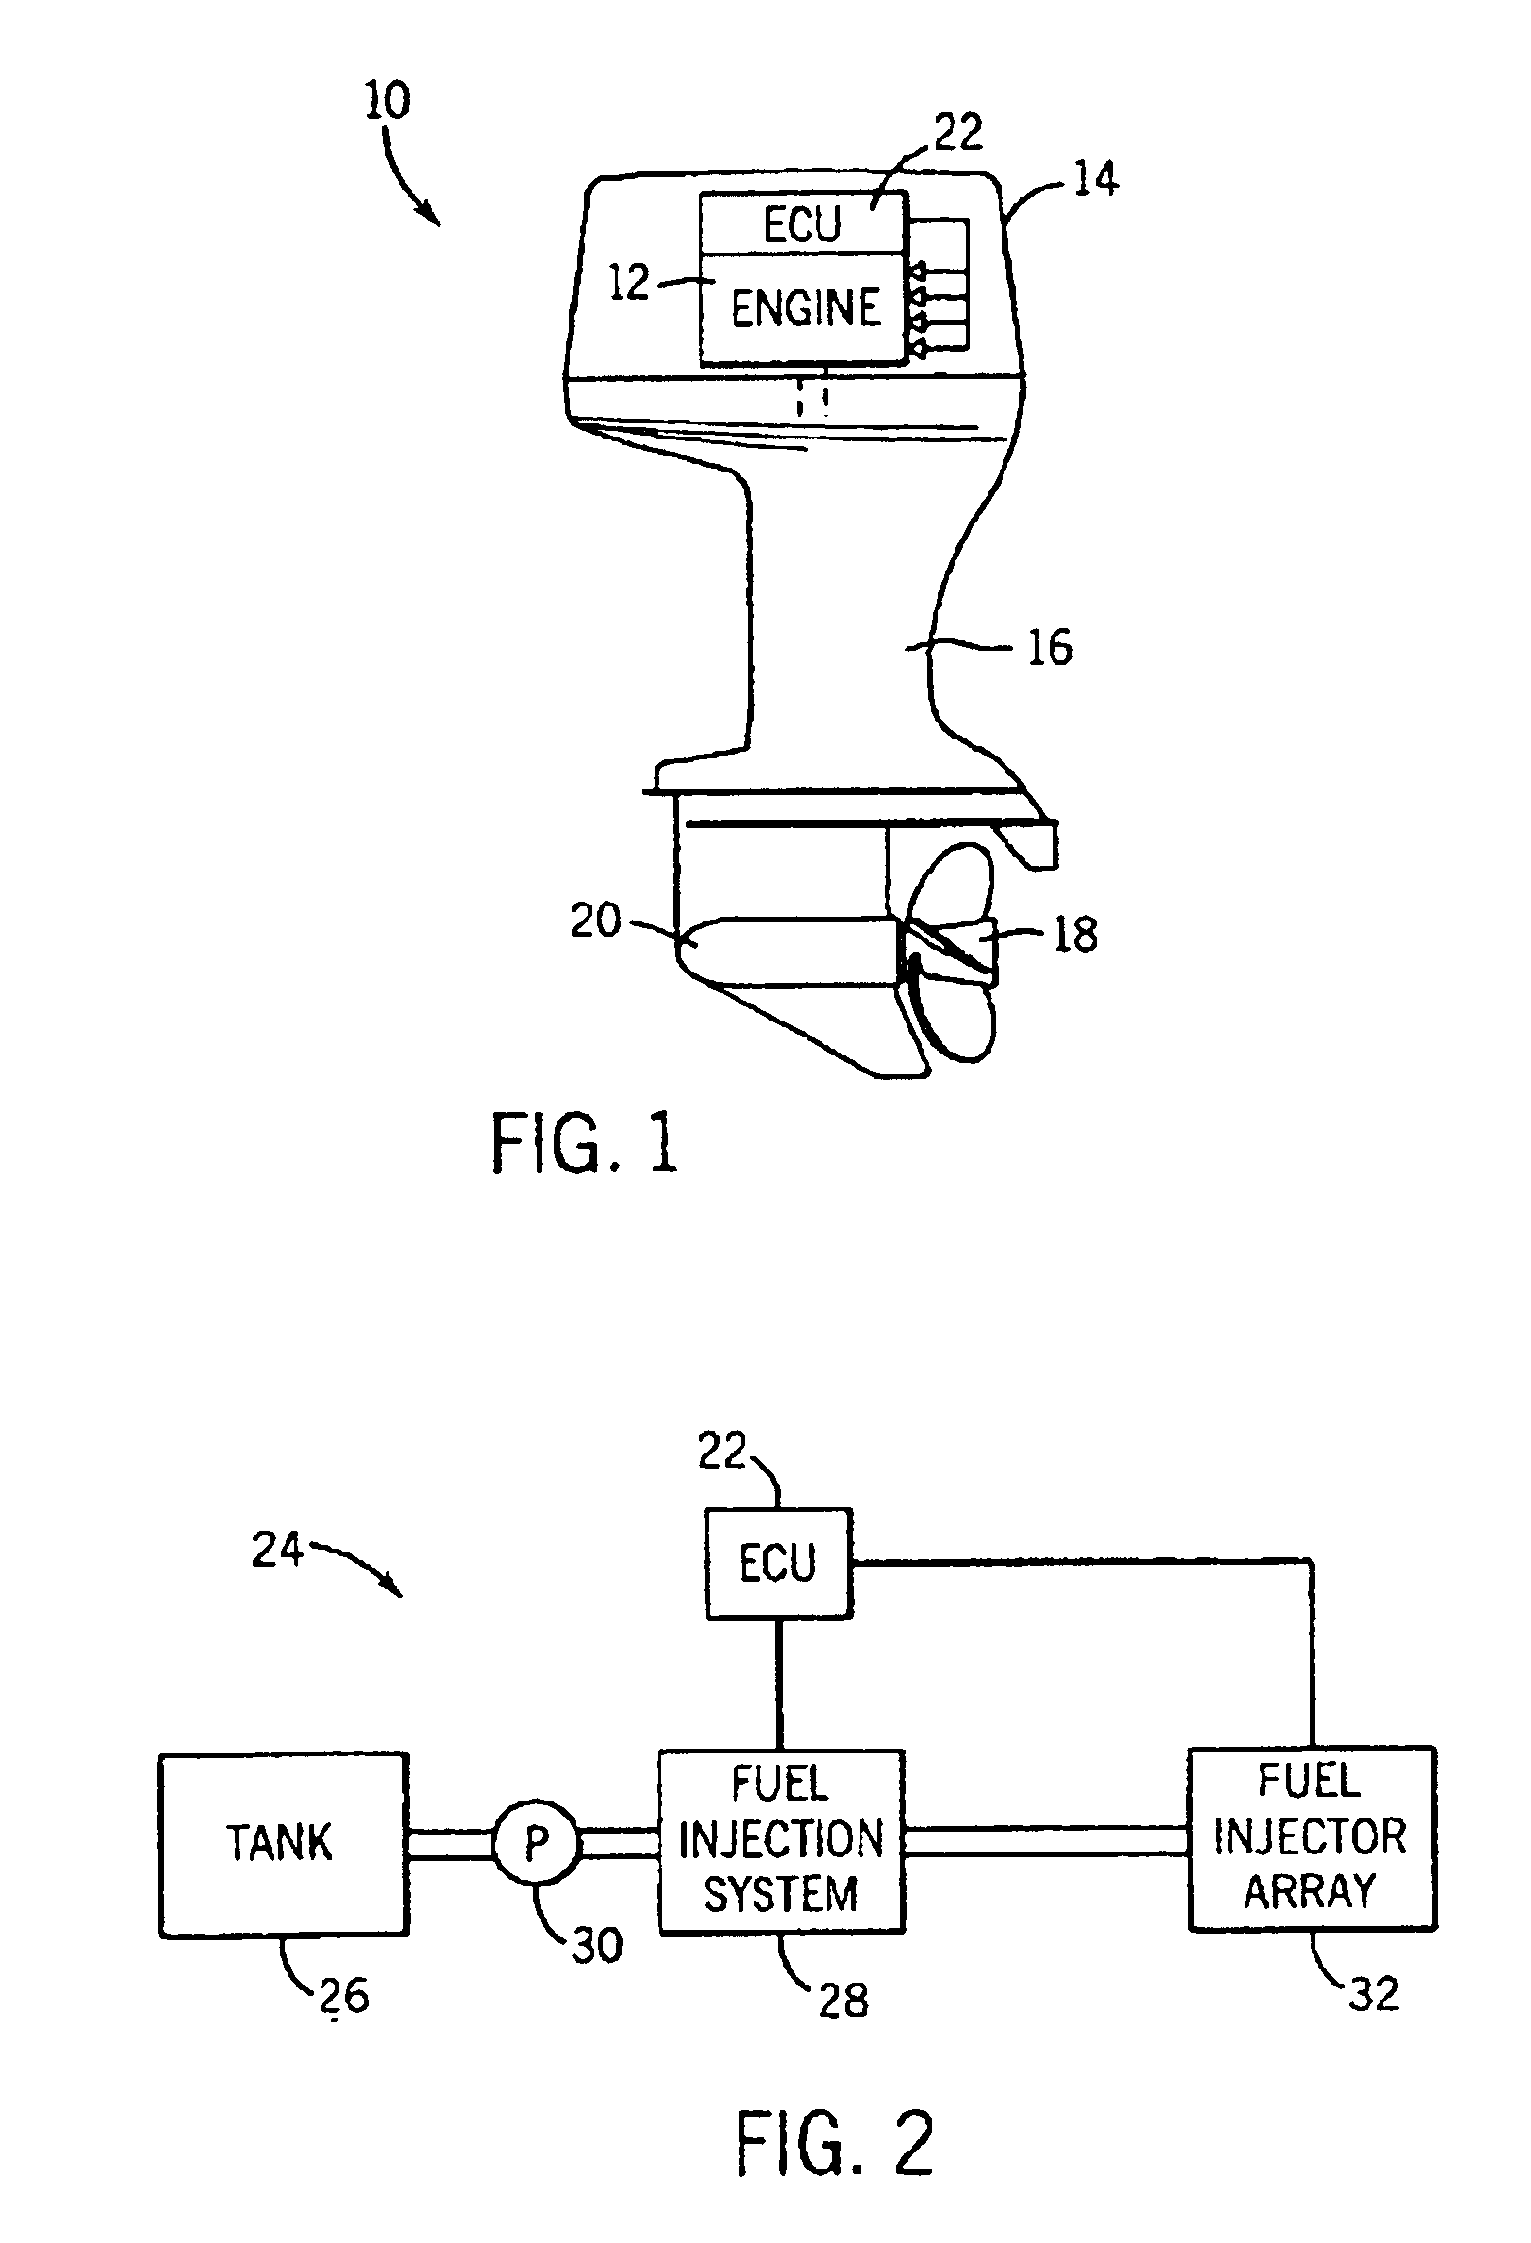 Piston for spark-ignited direct fuel injection engine